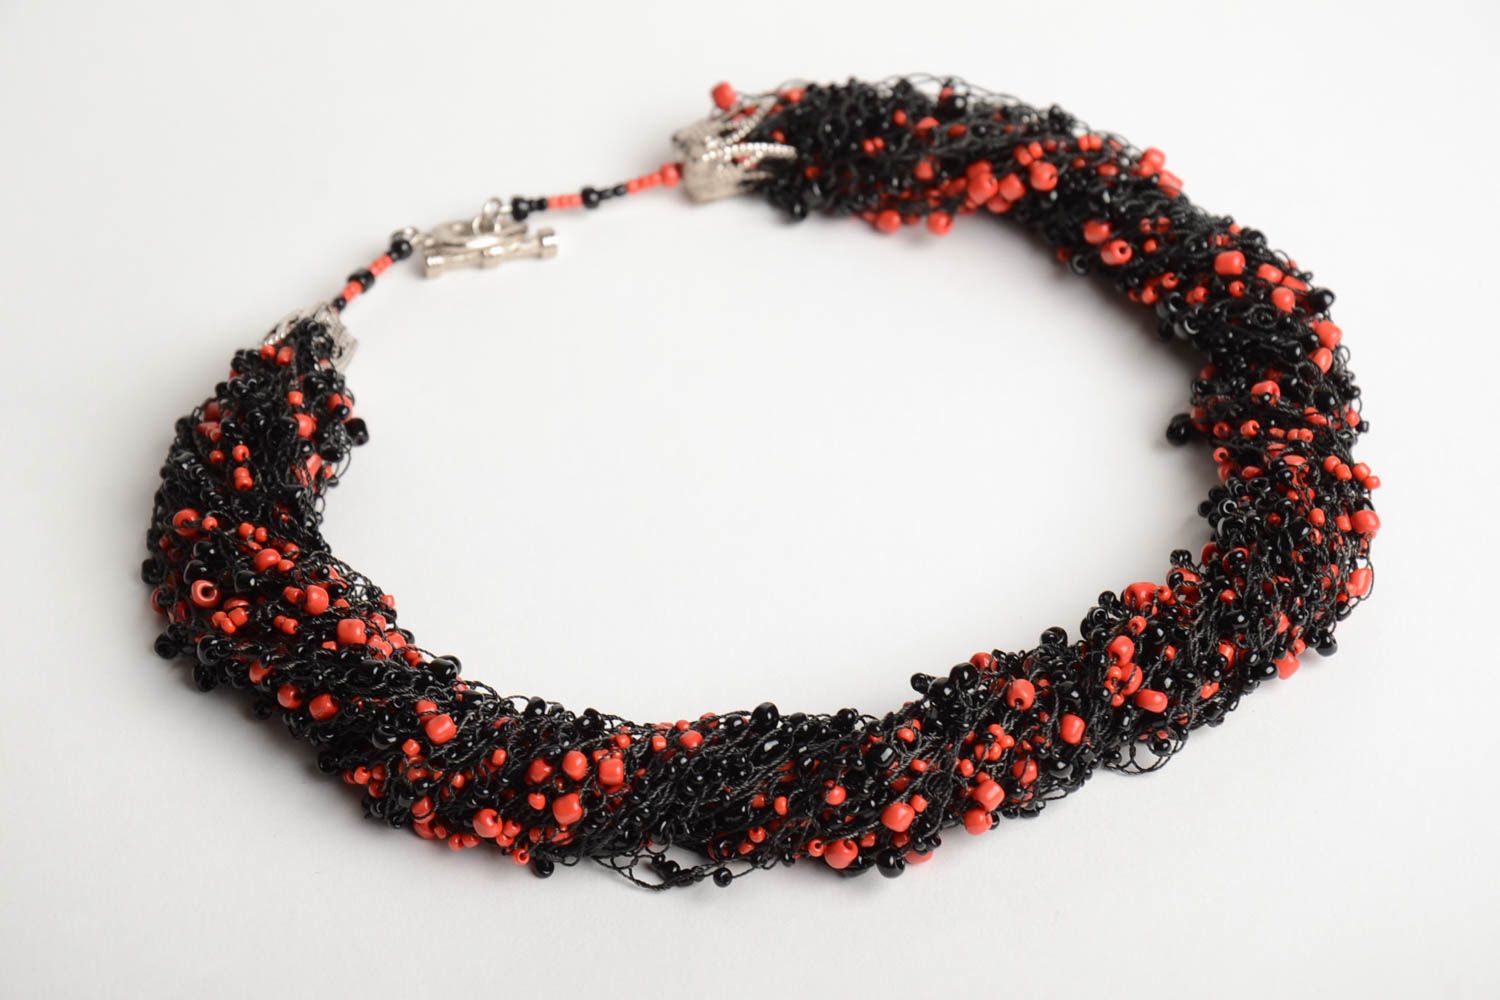 Handmade volume airy expressive necklace crocheted of red and black Czech beads photo 3